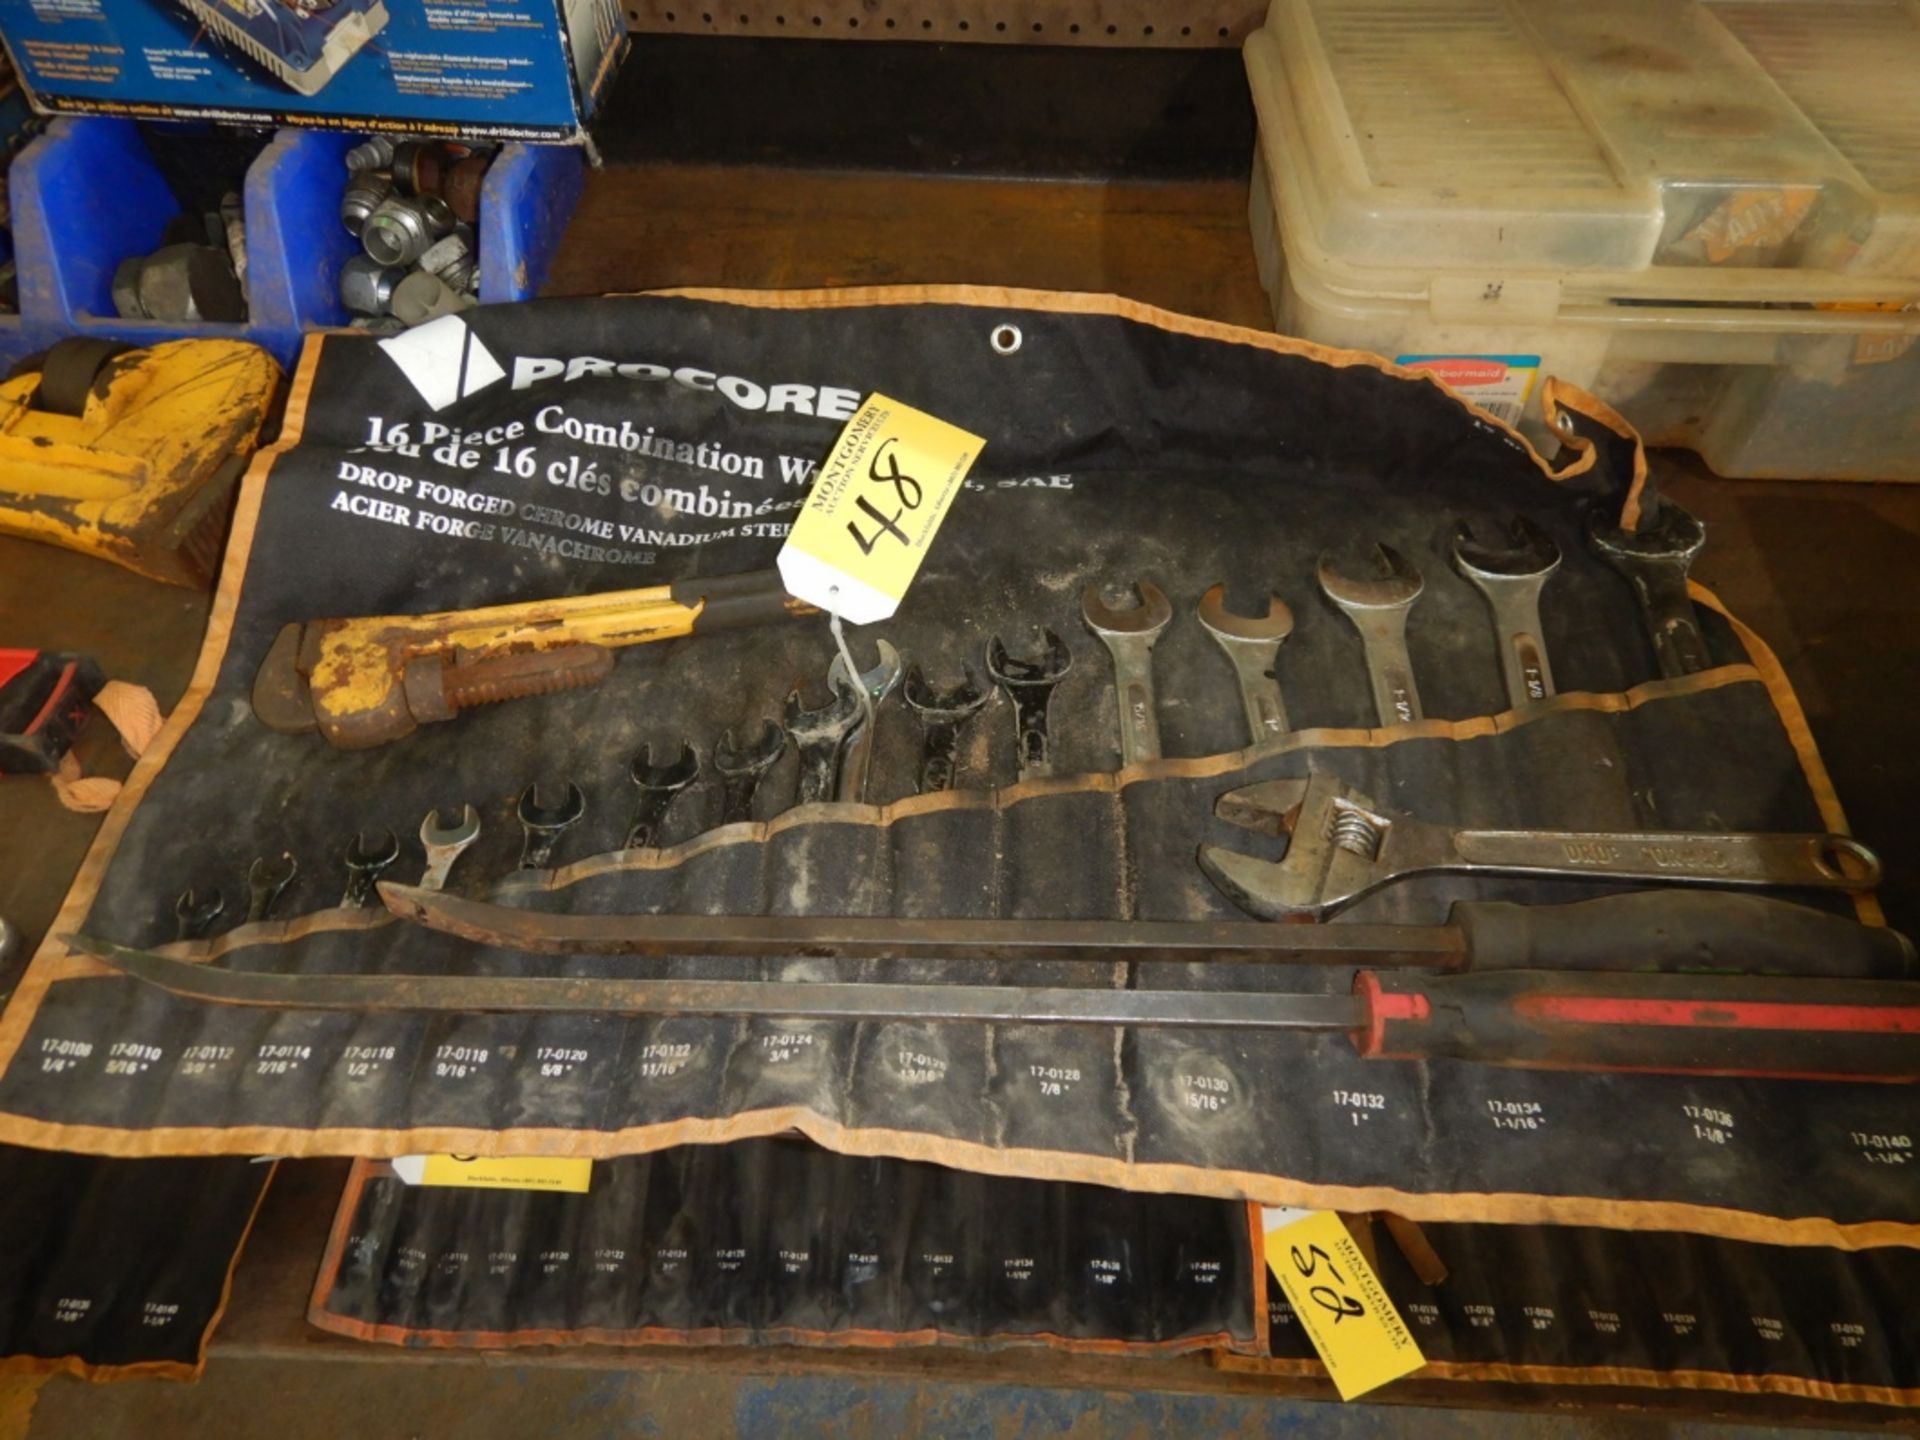 PROTO 24" CRESCENT WRENCH, 12" PIPE WRENCH, 24" & 36" PRY BARS, PROCORE 16 PC COMBINATION WRENCH SET - Image 2 of 4